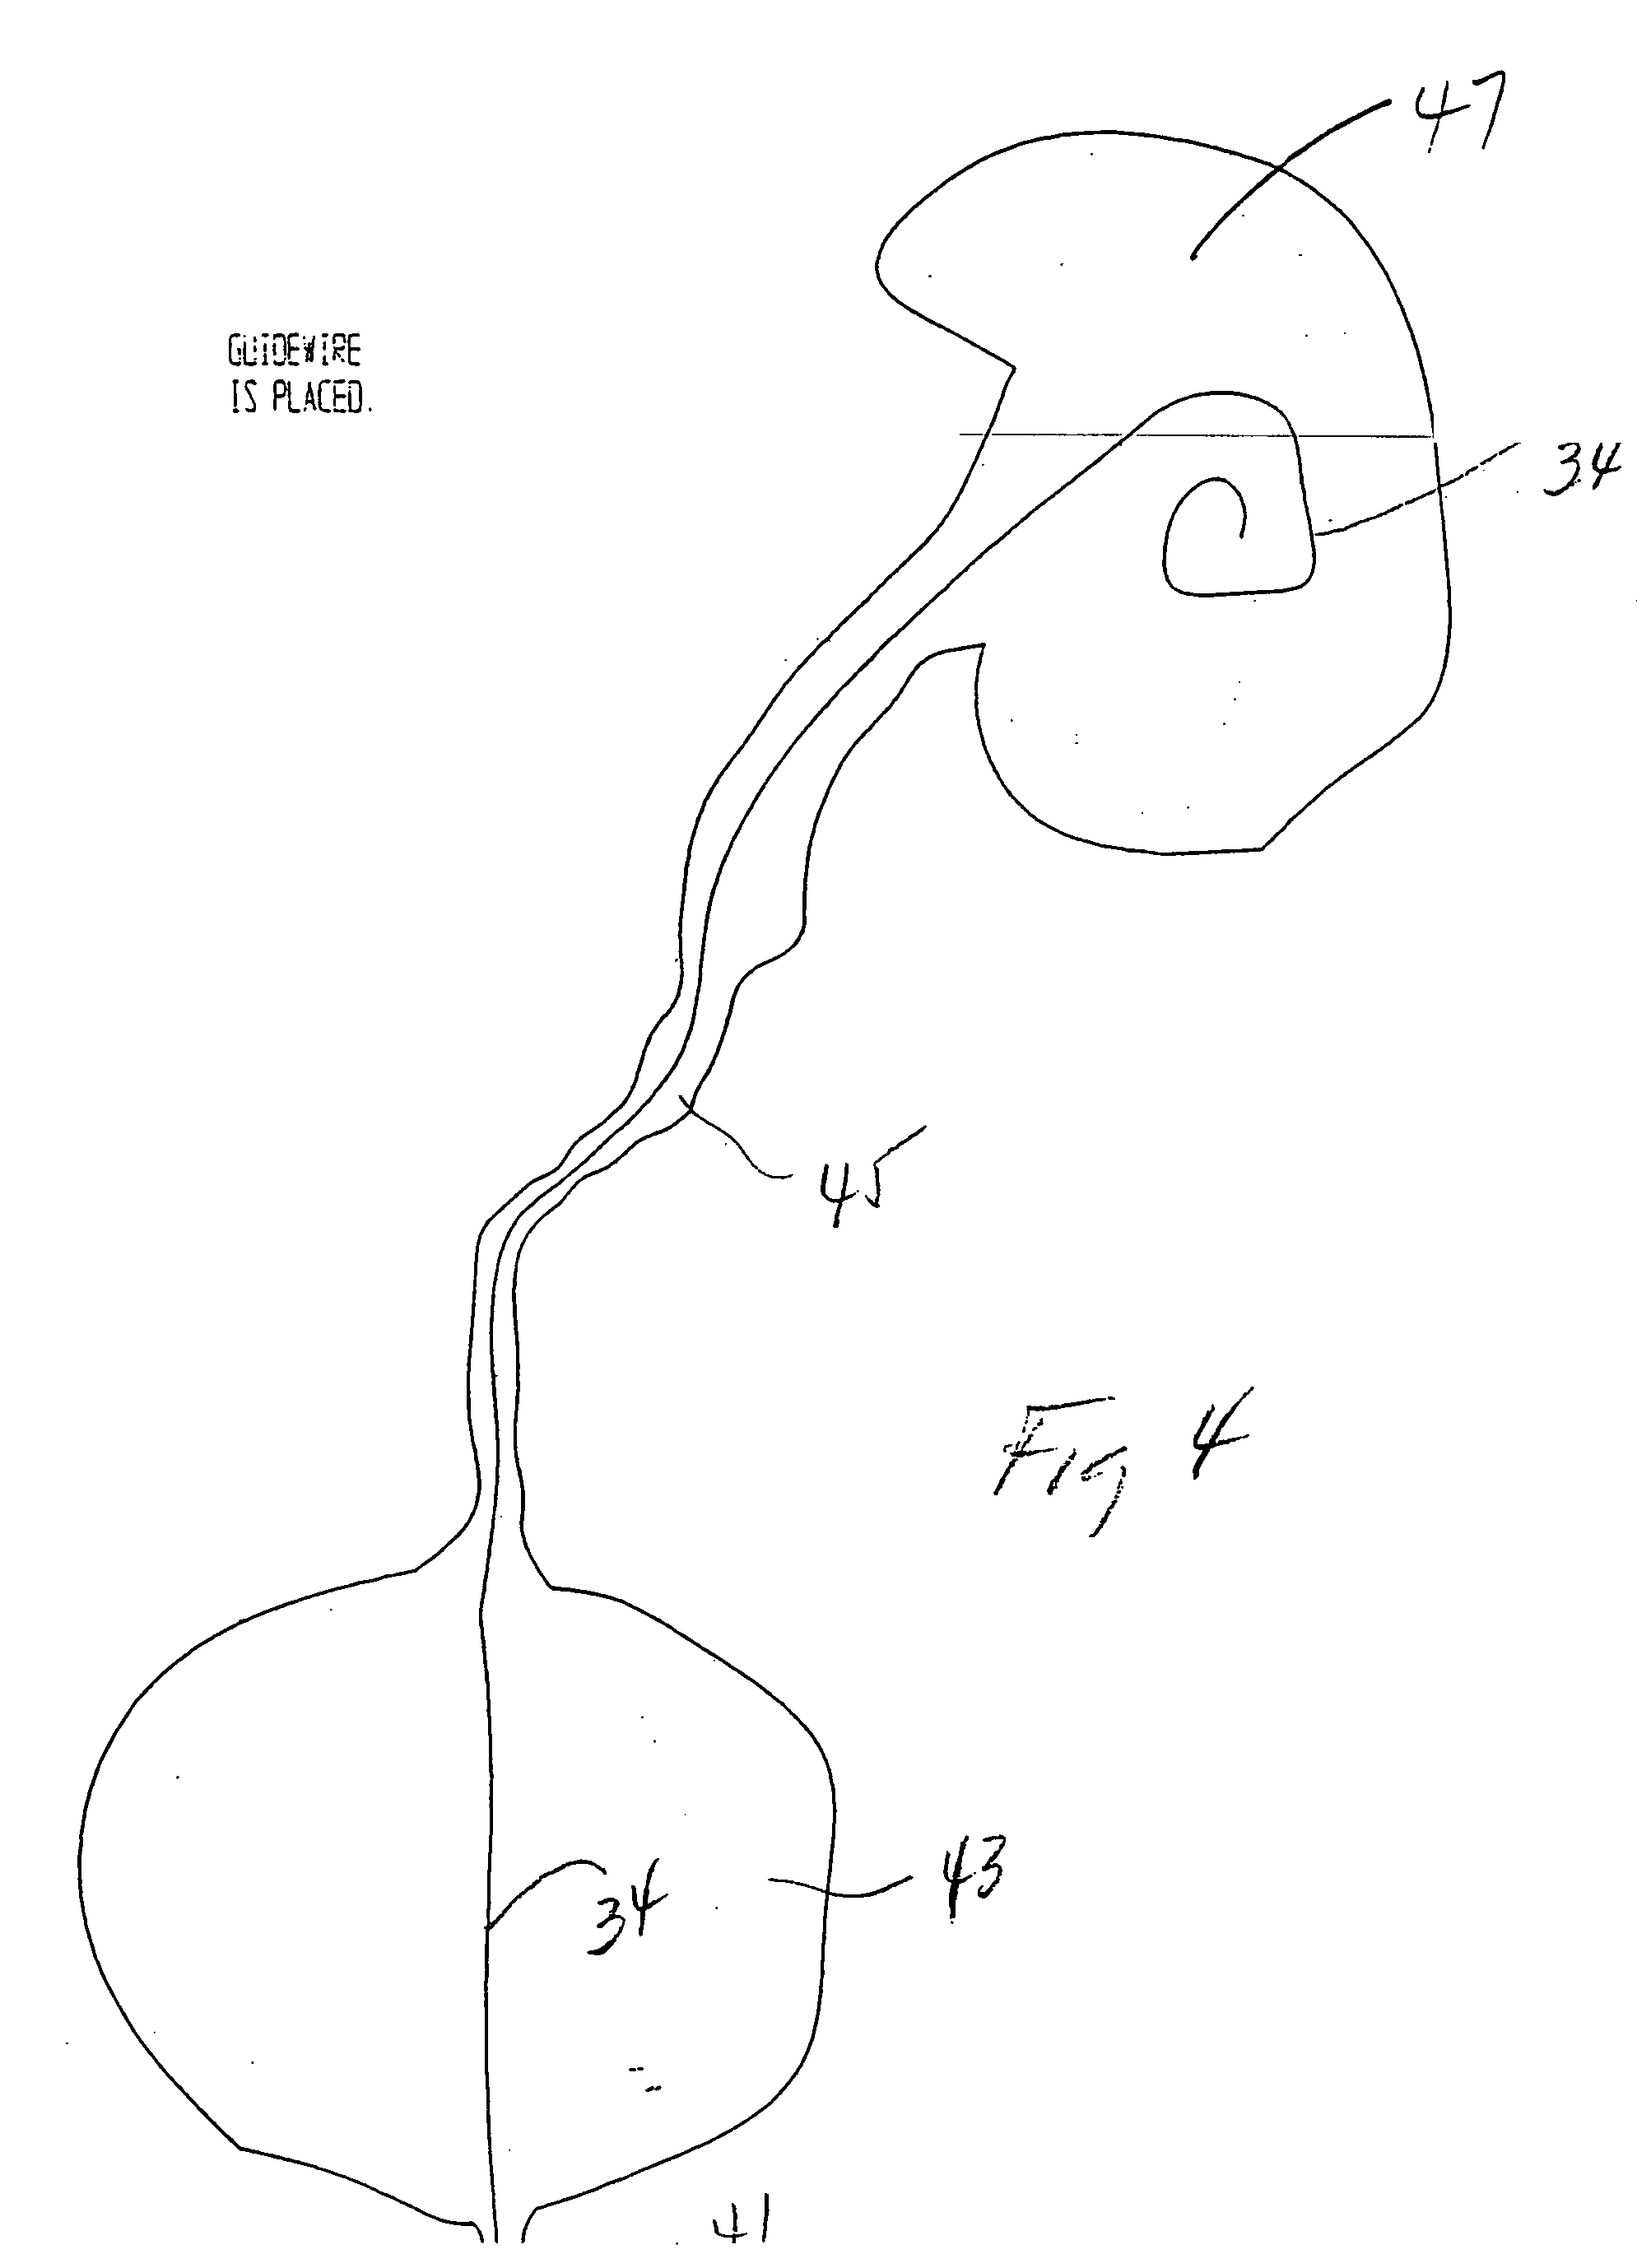 Stent delivery system and method